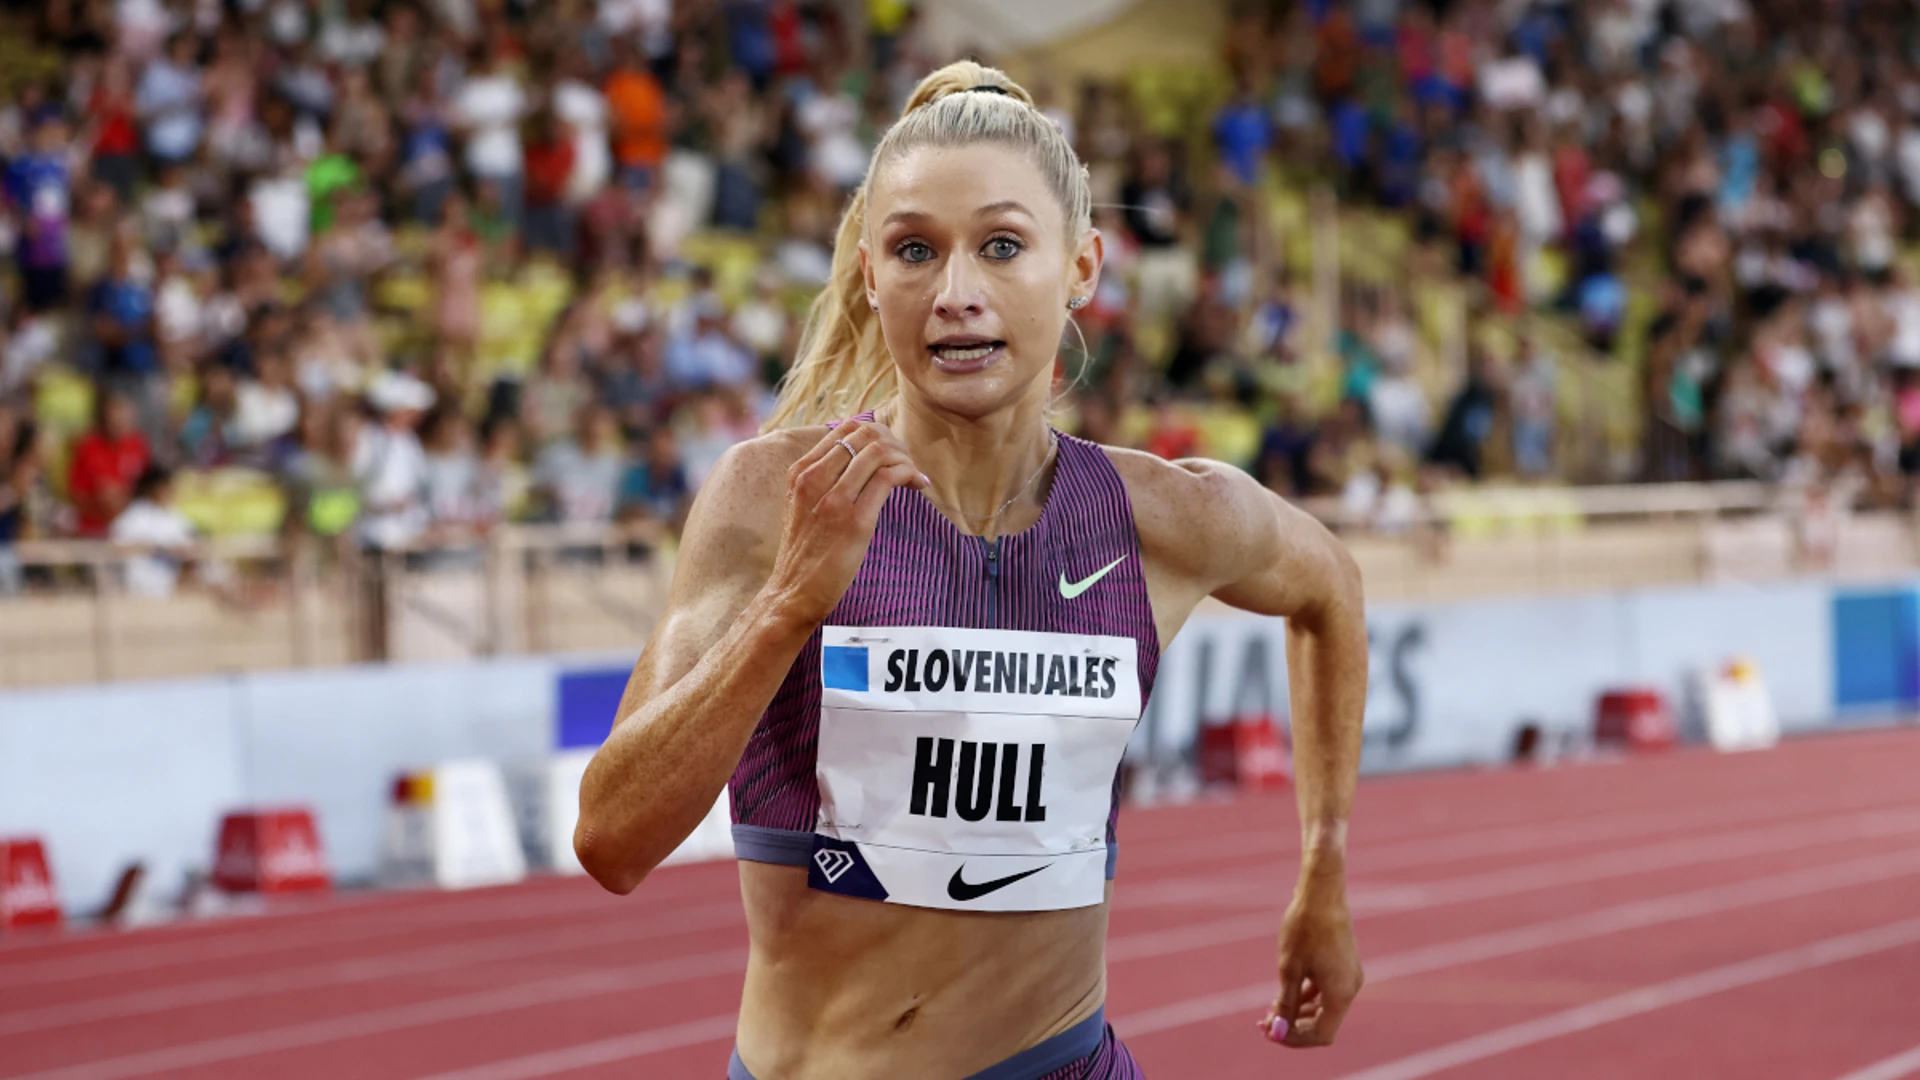 Australia's Hull races to world record in rarely-contested 2000m